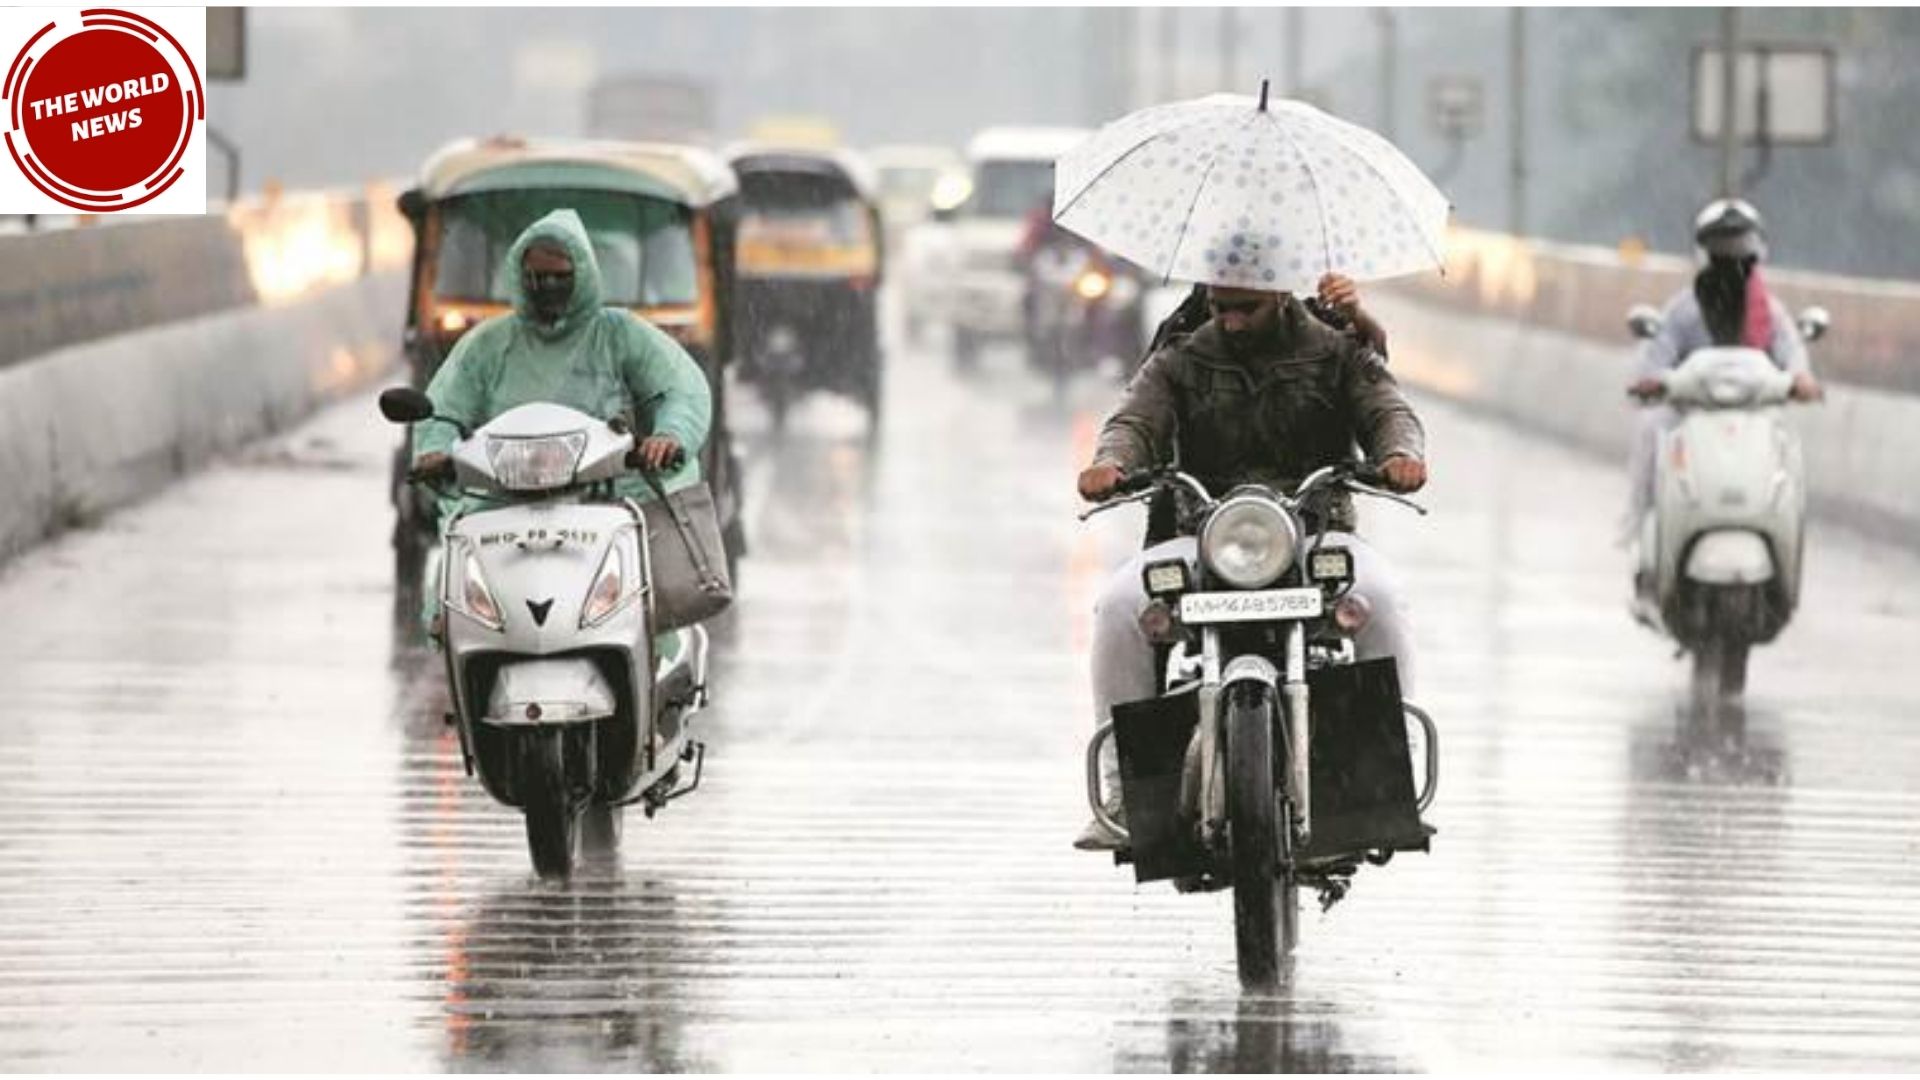 MONSOON 2020: LATEST AND STATEWISE WEATHER FORECAST UPDATES ACROSS INDIA